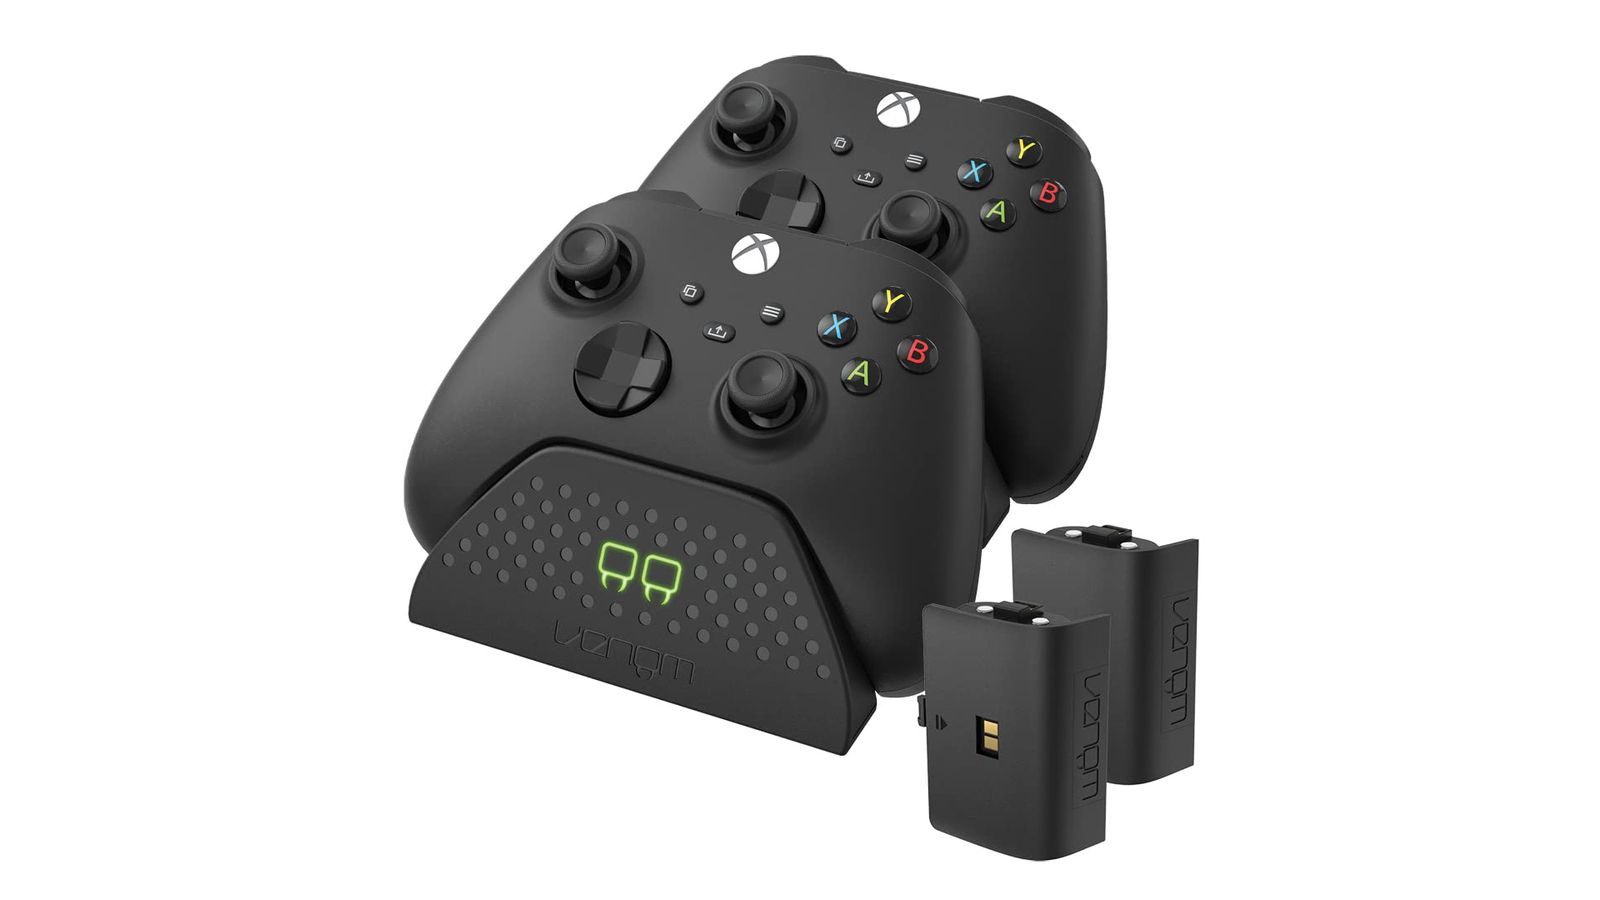 Venom Twin Charging Dock product image of two black Xbox controllers connected to a black charging stand with green lights on the front.